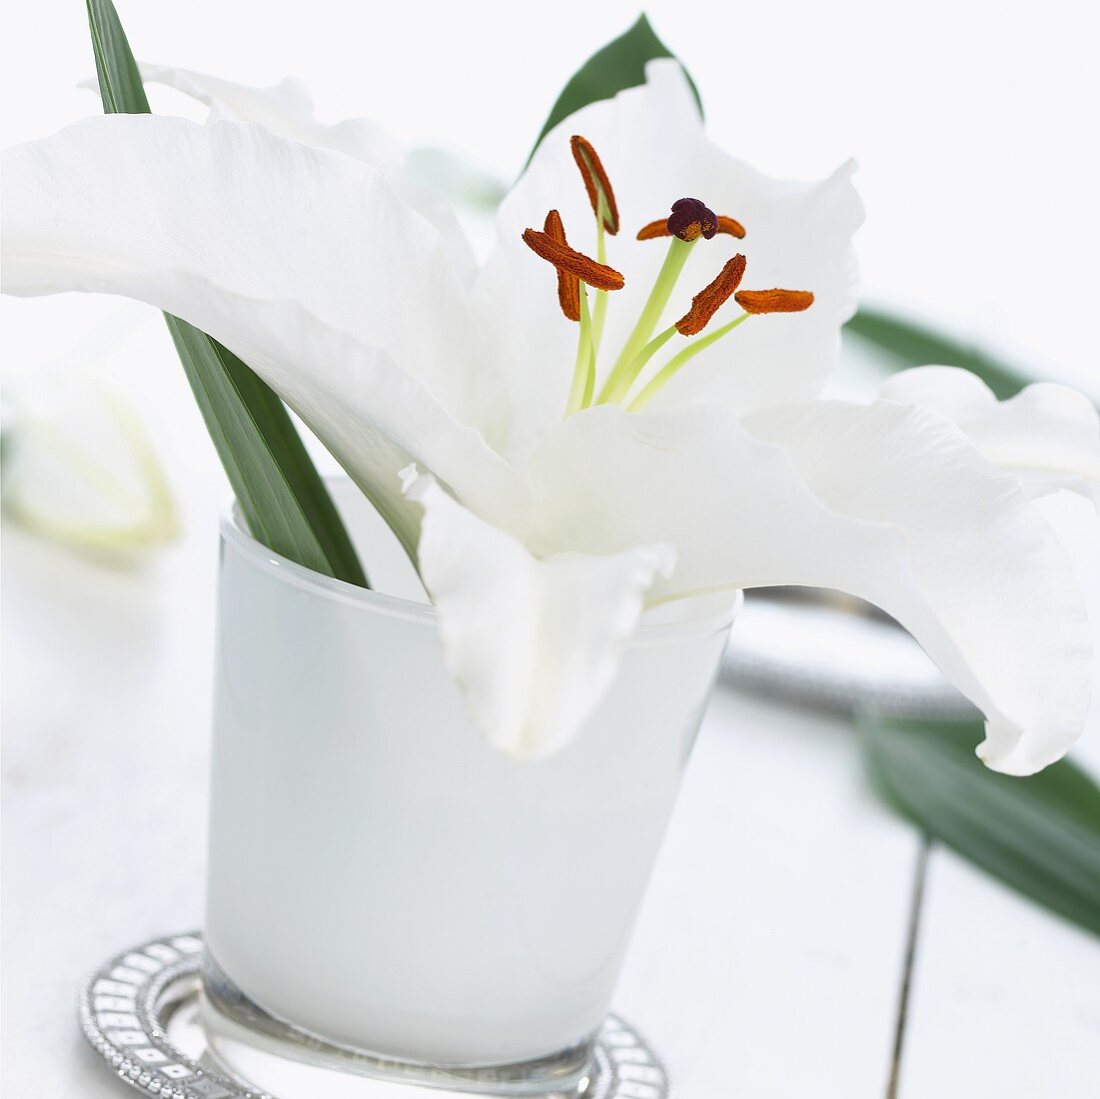 White lily ('Cantarino') in vase